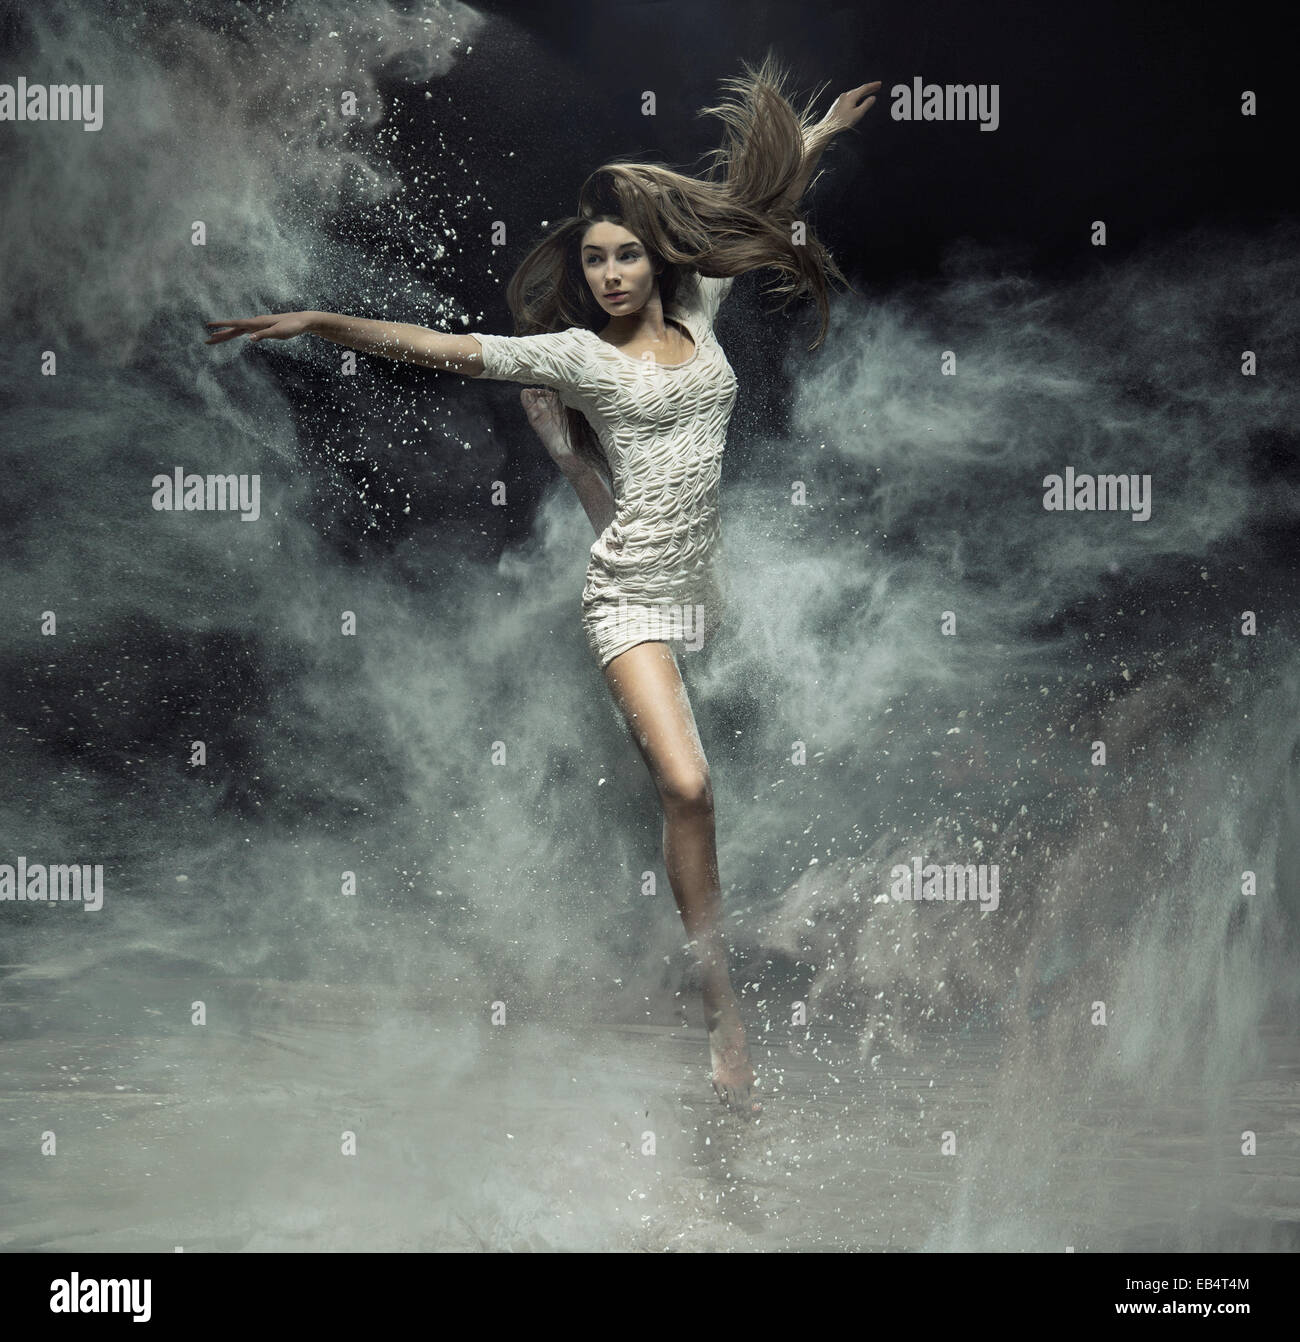 Talented ballet dancer catching the white dust Stock Photo